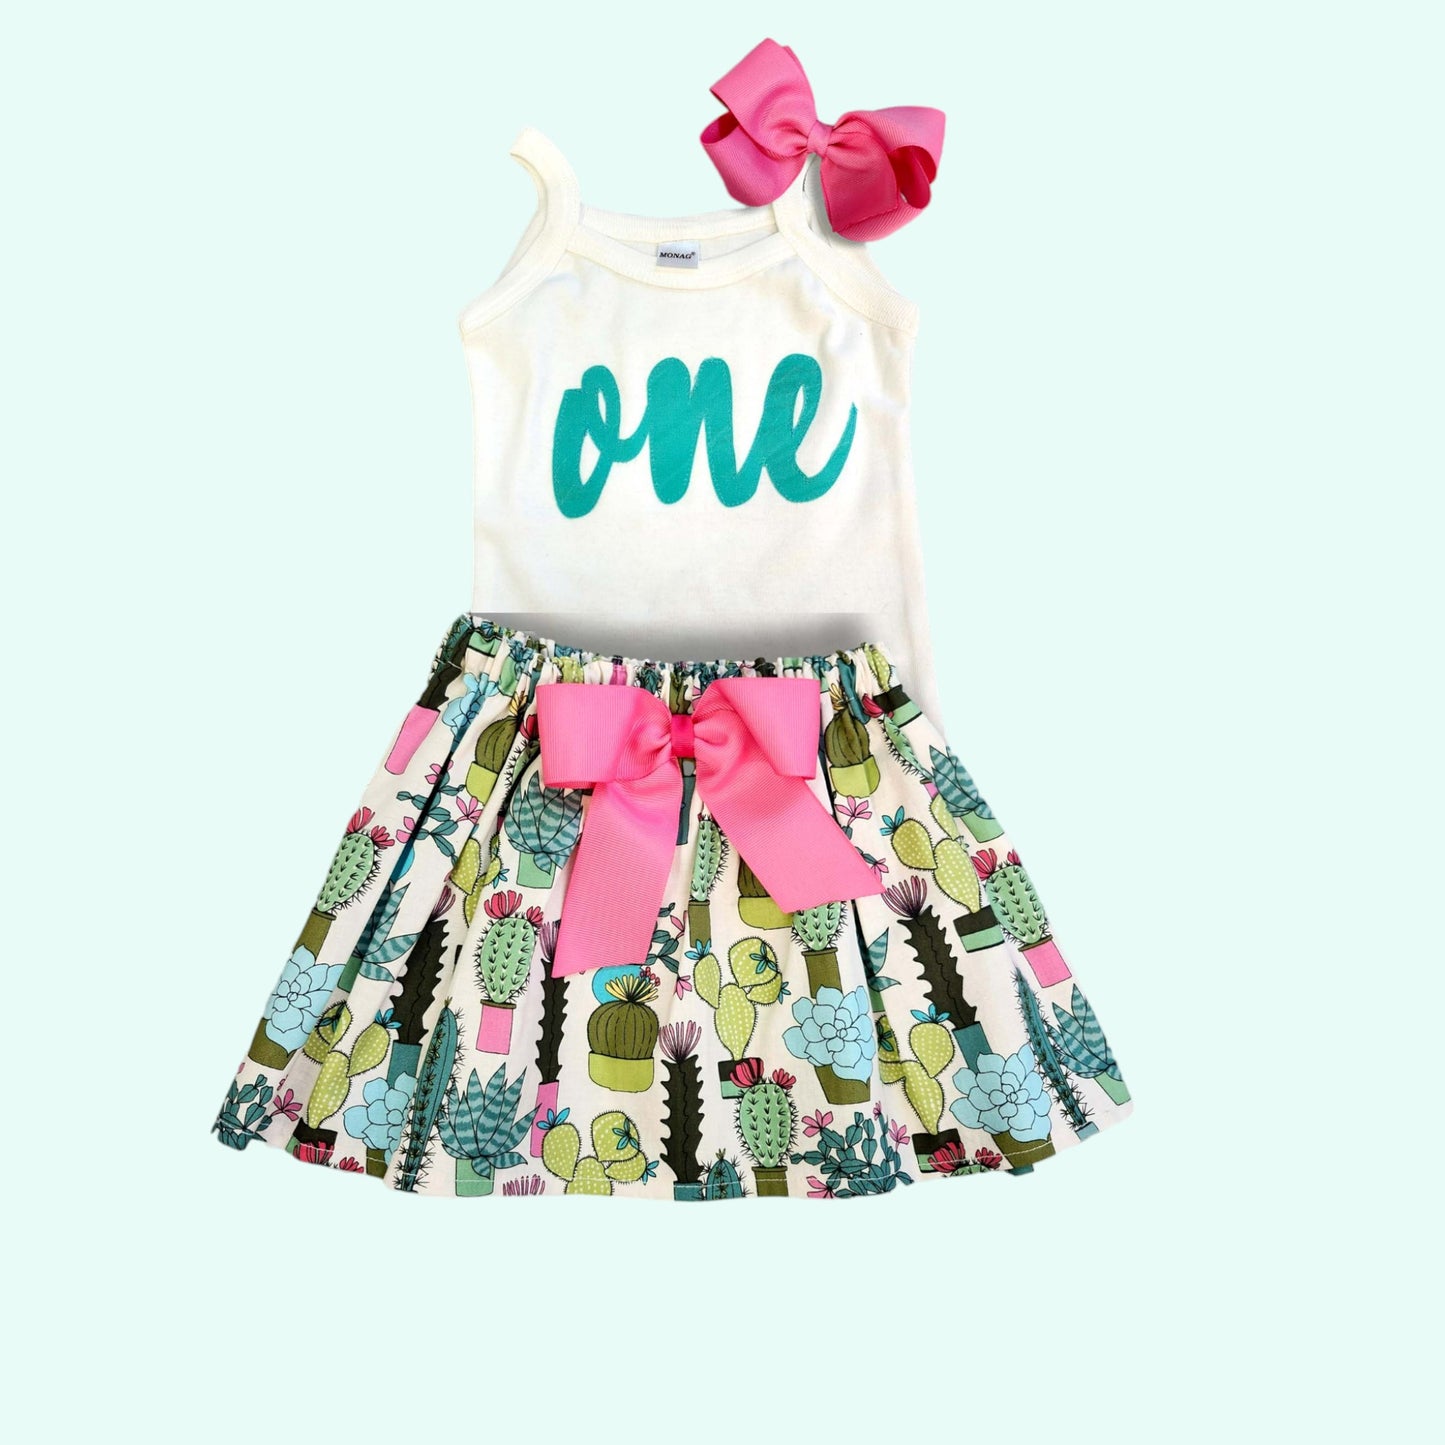 1st birthday outfit,  Age Cactus Birthday Toddler Outfit, Applique Birthday Number, Girls Shirt and Skirt Set